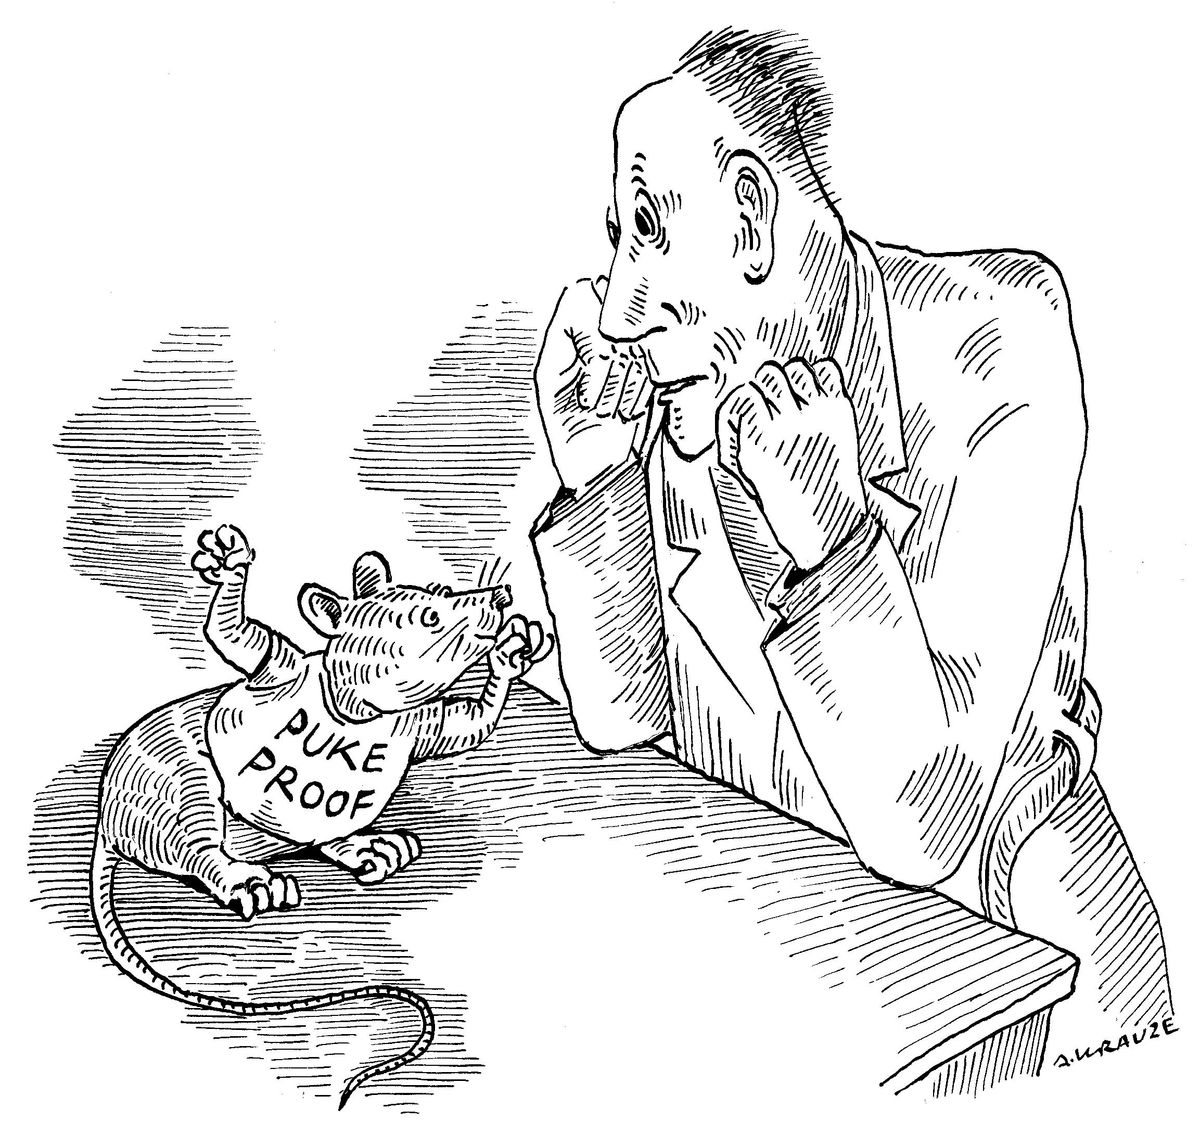 Illustration of a scientist looking at a mouse with a puke proof shirt on